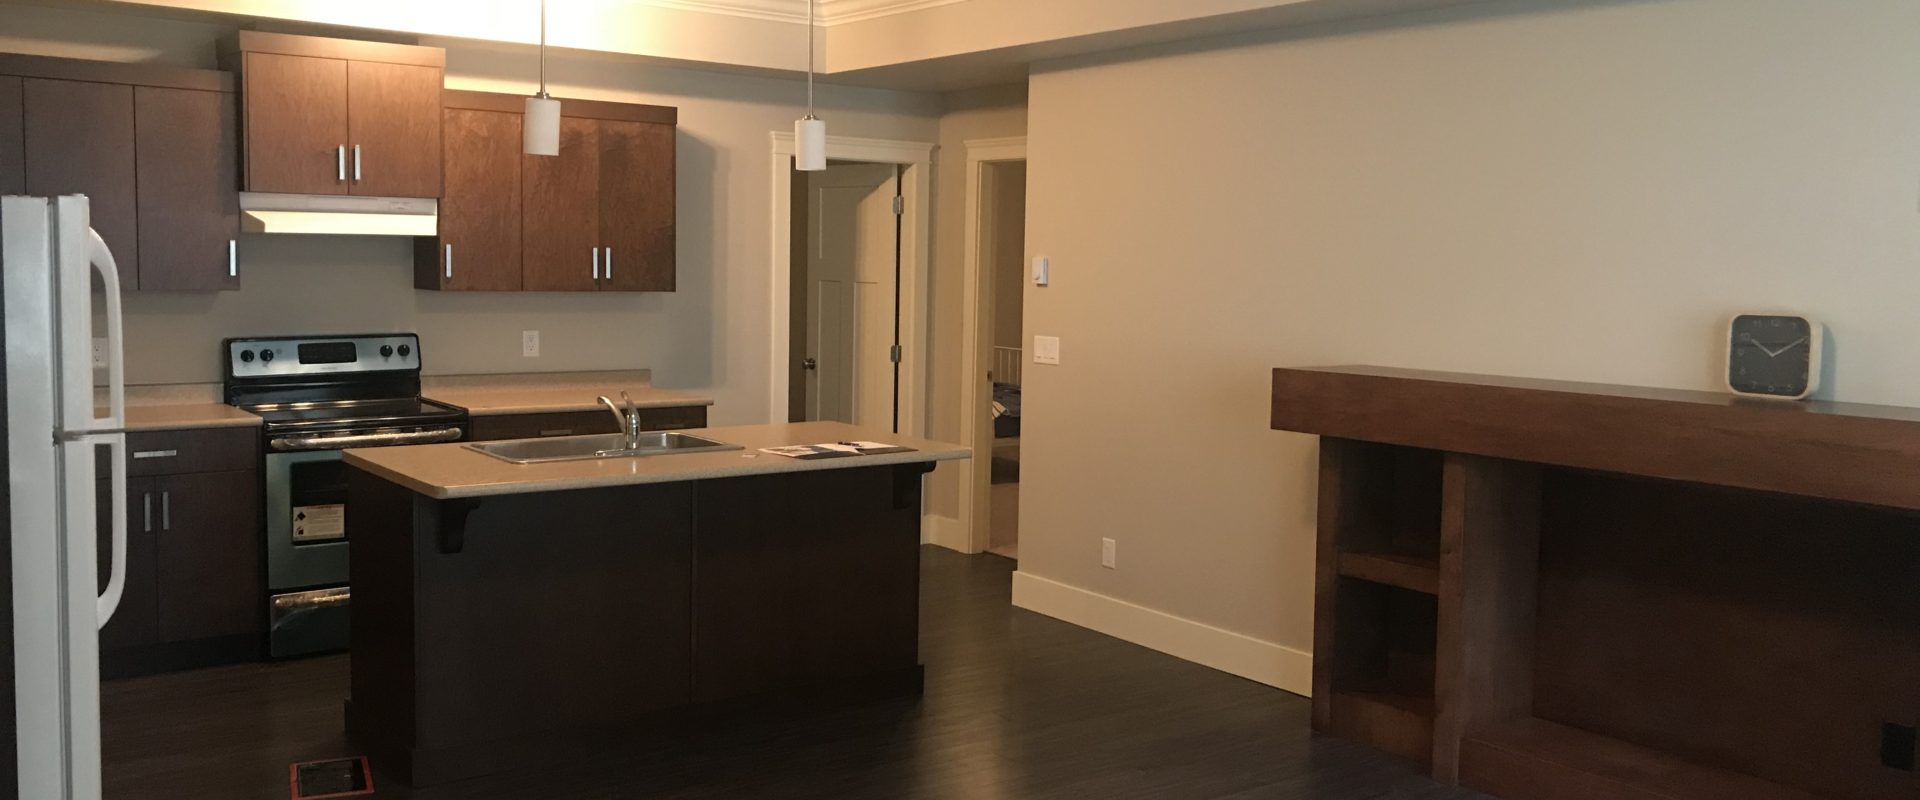 Anmore 2br 1ba basement suite for rent(everything included!)